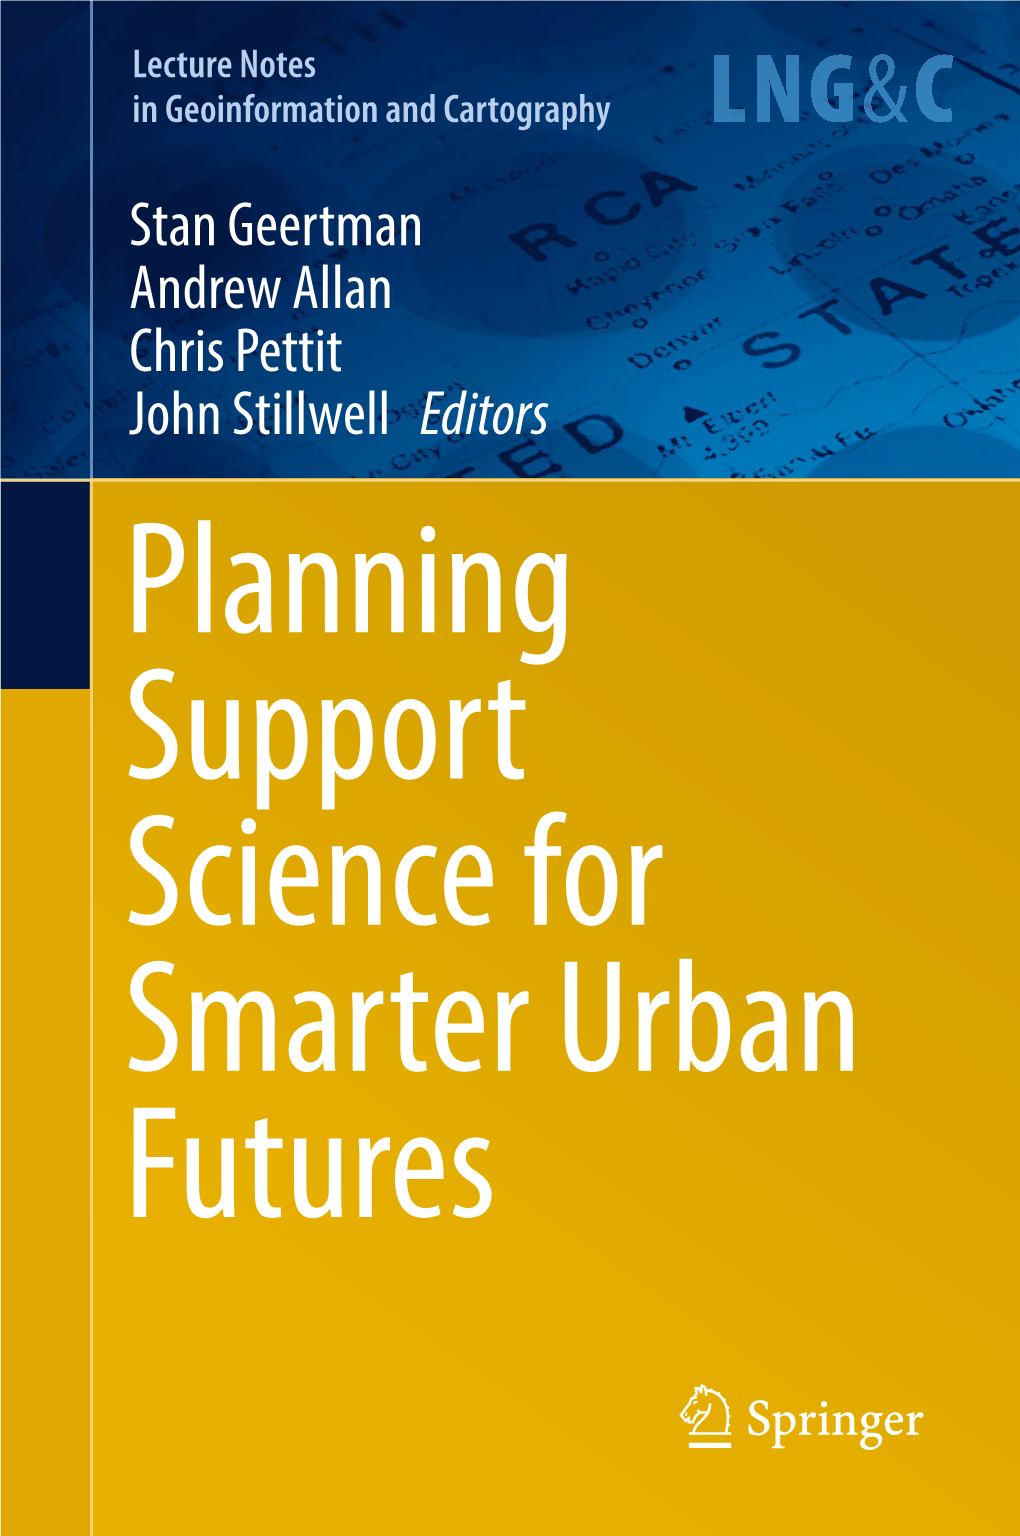 Stan Geertman Andrew Allan Chris Pettit John Stillwell Editors Planning Support Science for Smarter Urban Futures Lecture Notes in Geoinformation and Cartography